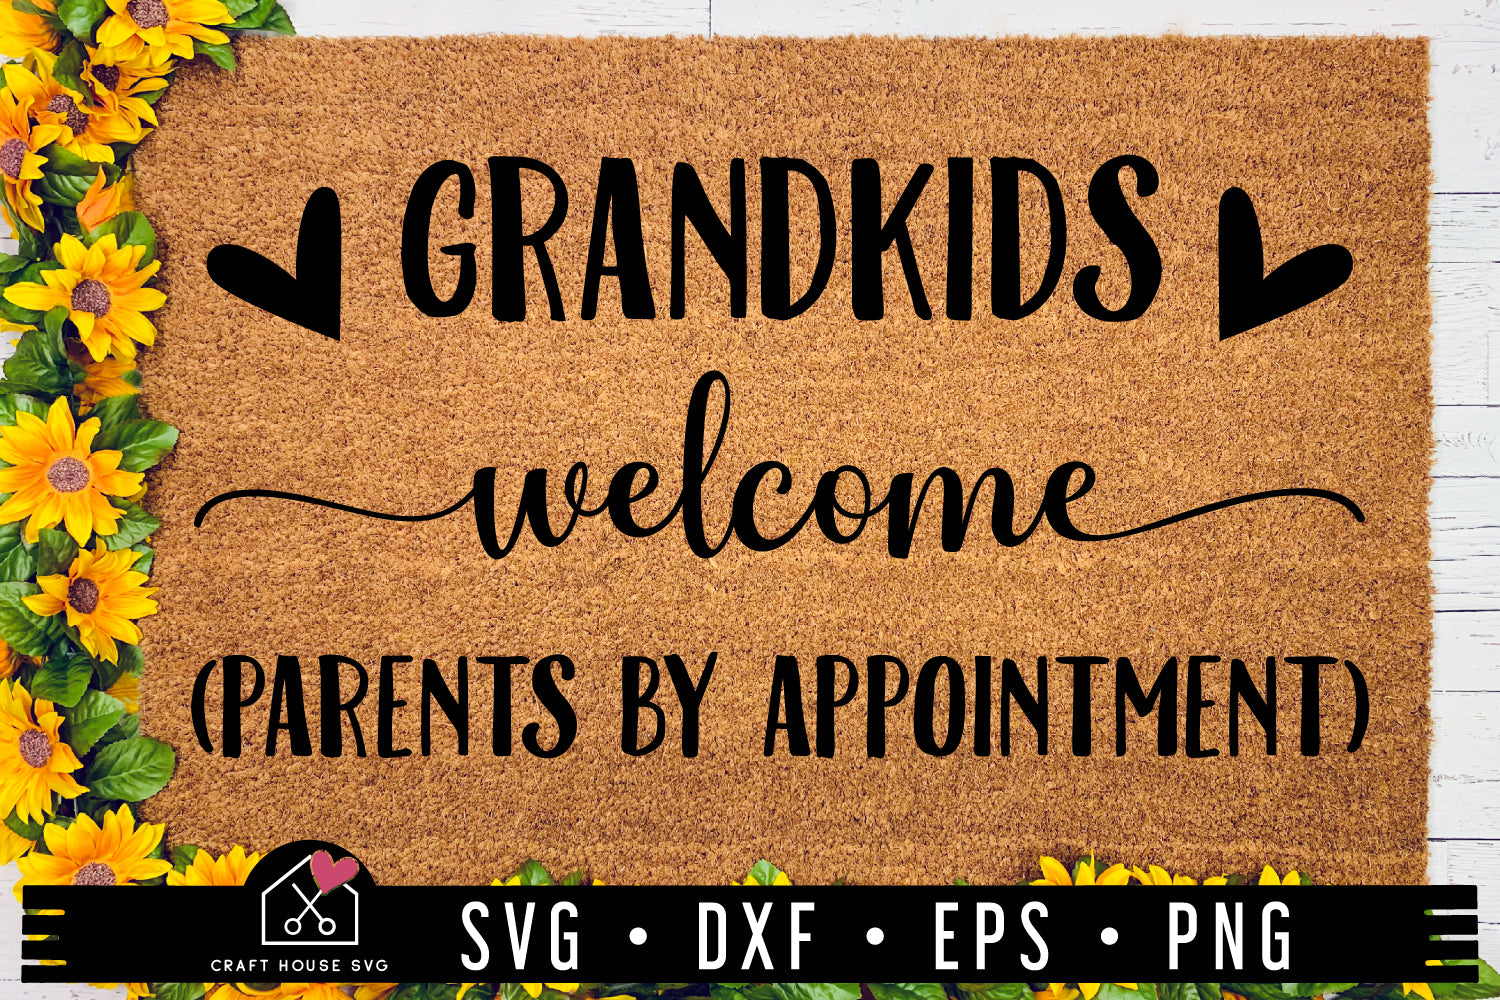 Grandkids welcome parents by appointment SVG Funny Grandparents Doormat Cut File